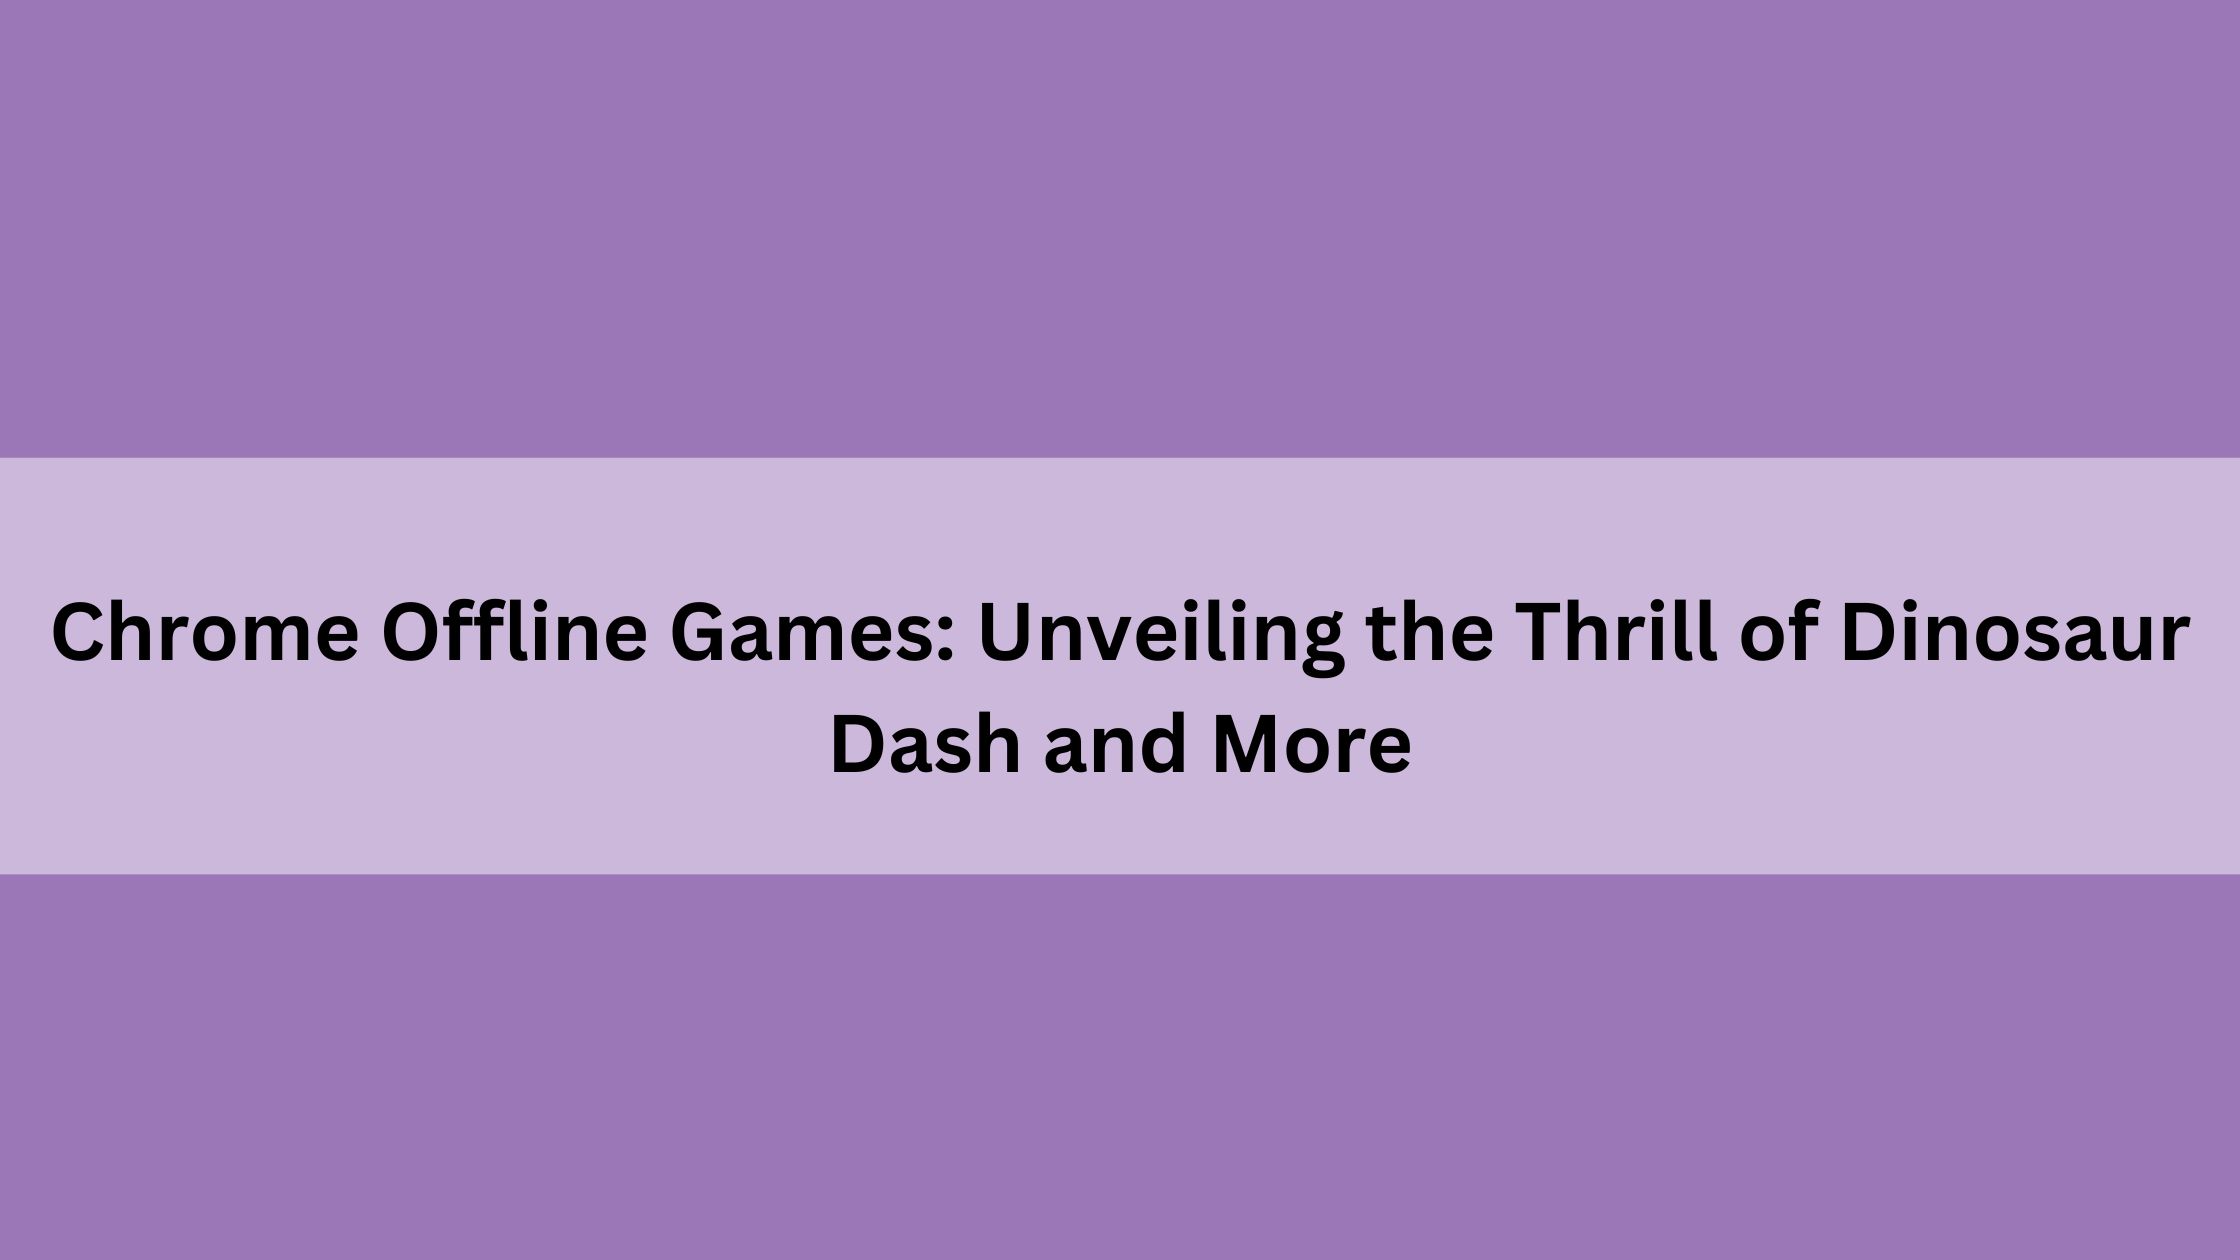 Chrome Offline Games: Unveiling the Thrill of Dinosaur Dash and More